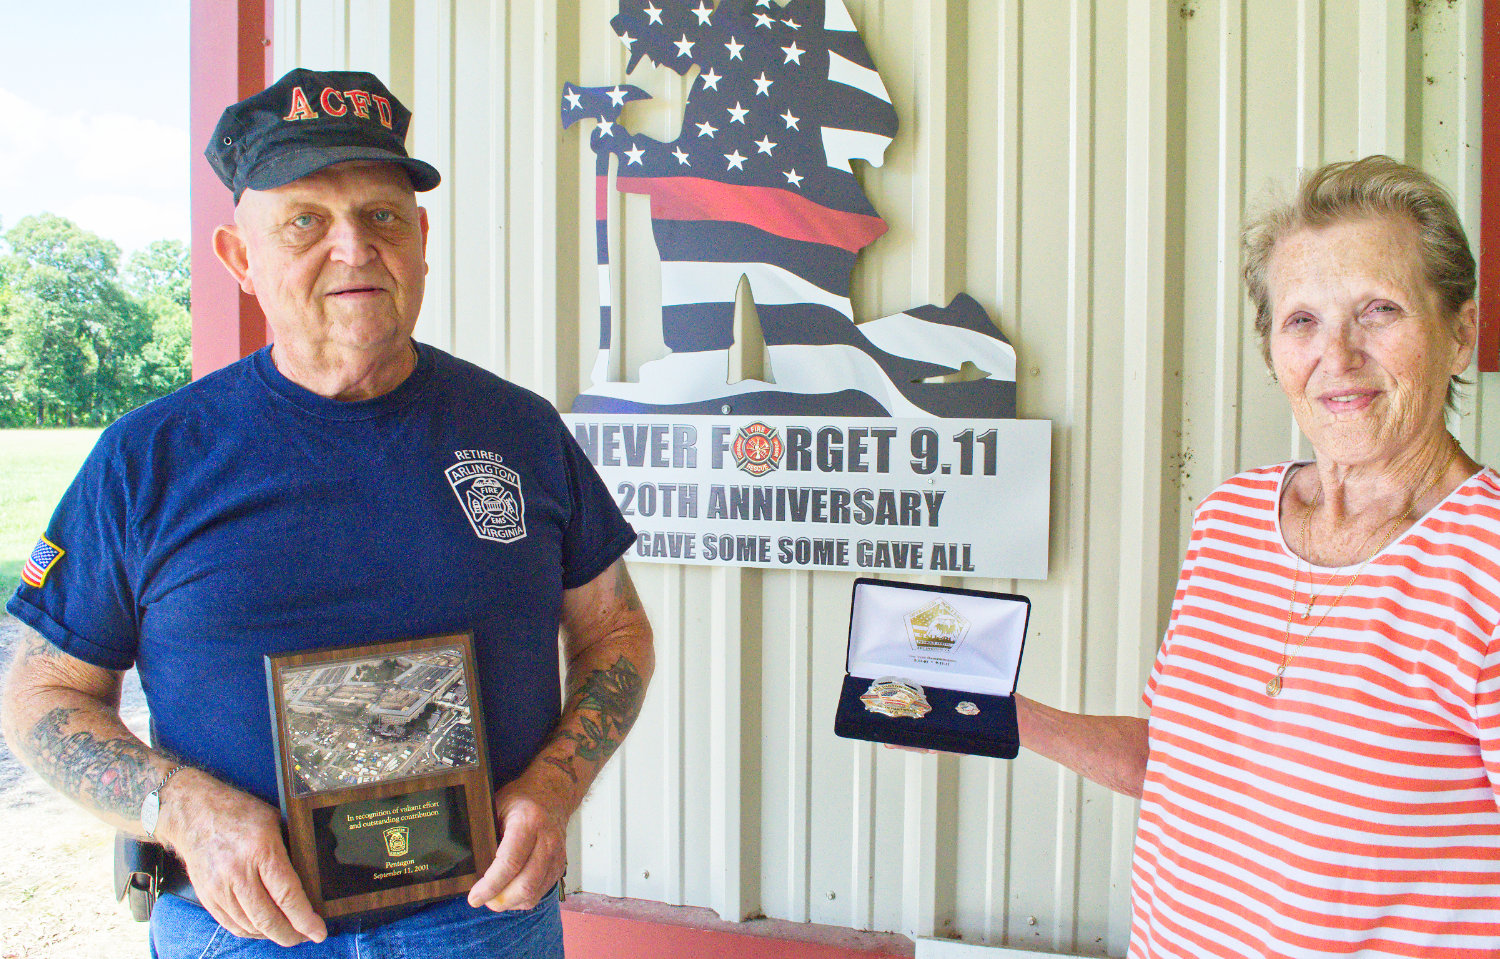 Nelson and Diane Eaton of Lake Fork with his commemorative plaque, badge and pin for his service with the Arlington County, Virginia fire service following the Sept. 11, 2001 terrorist attack on the Pentagon. He recently installed the 20th anniversary memorial at their home.